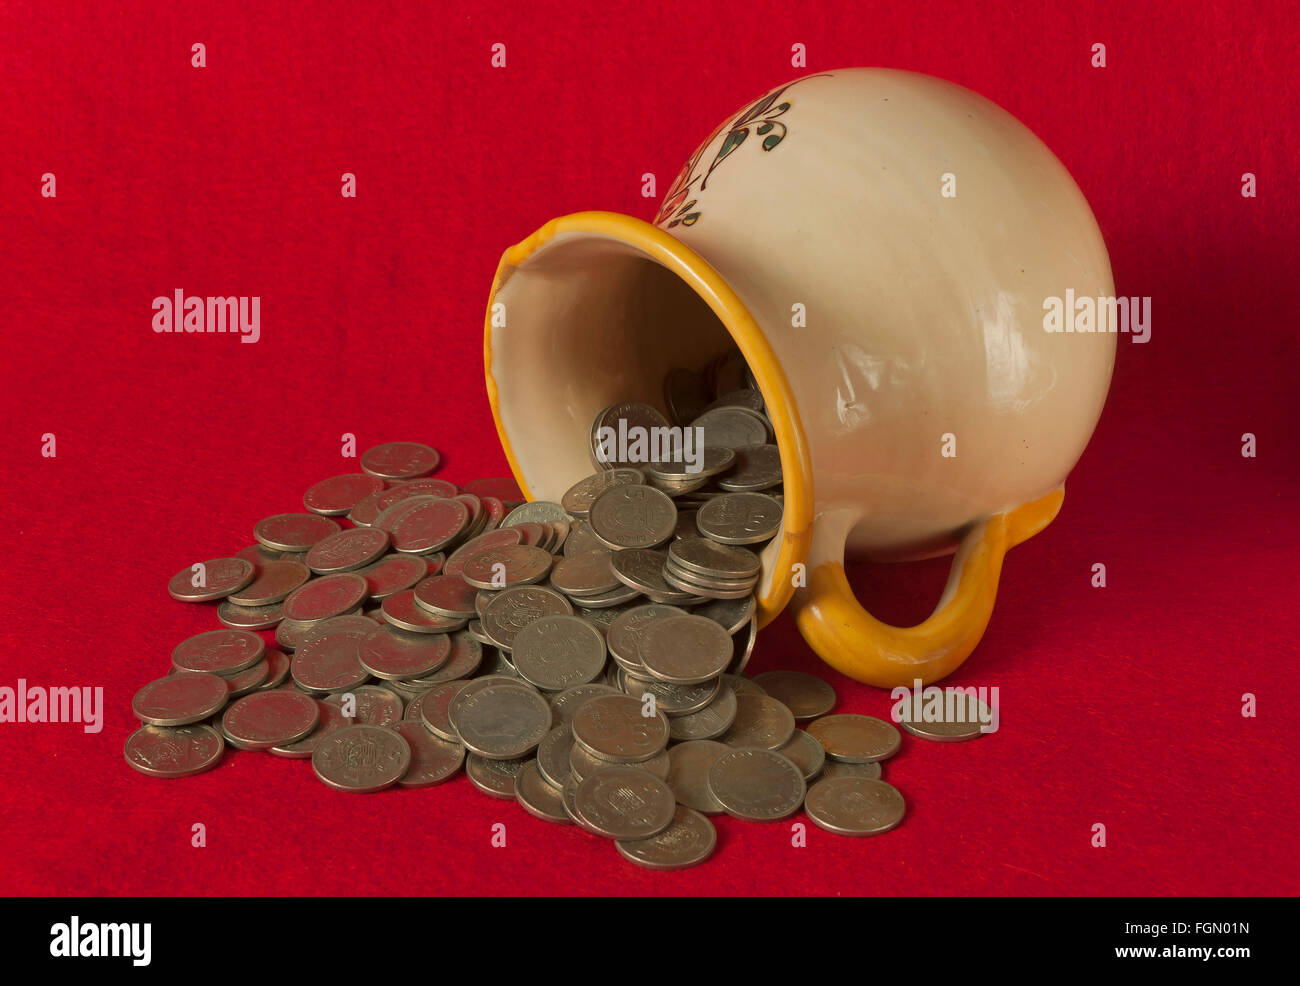 Vessel and coins, saving allegory Stock Photo